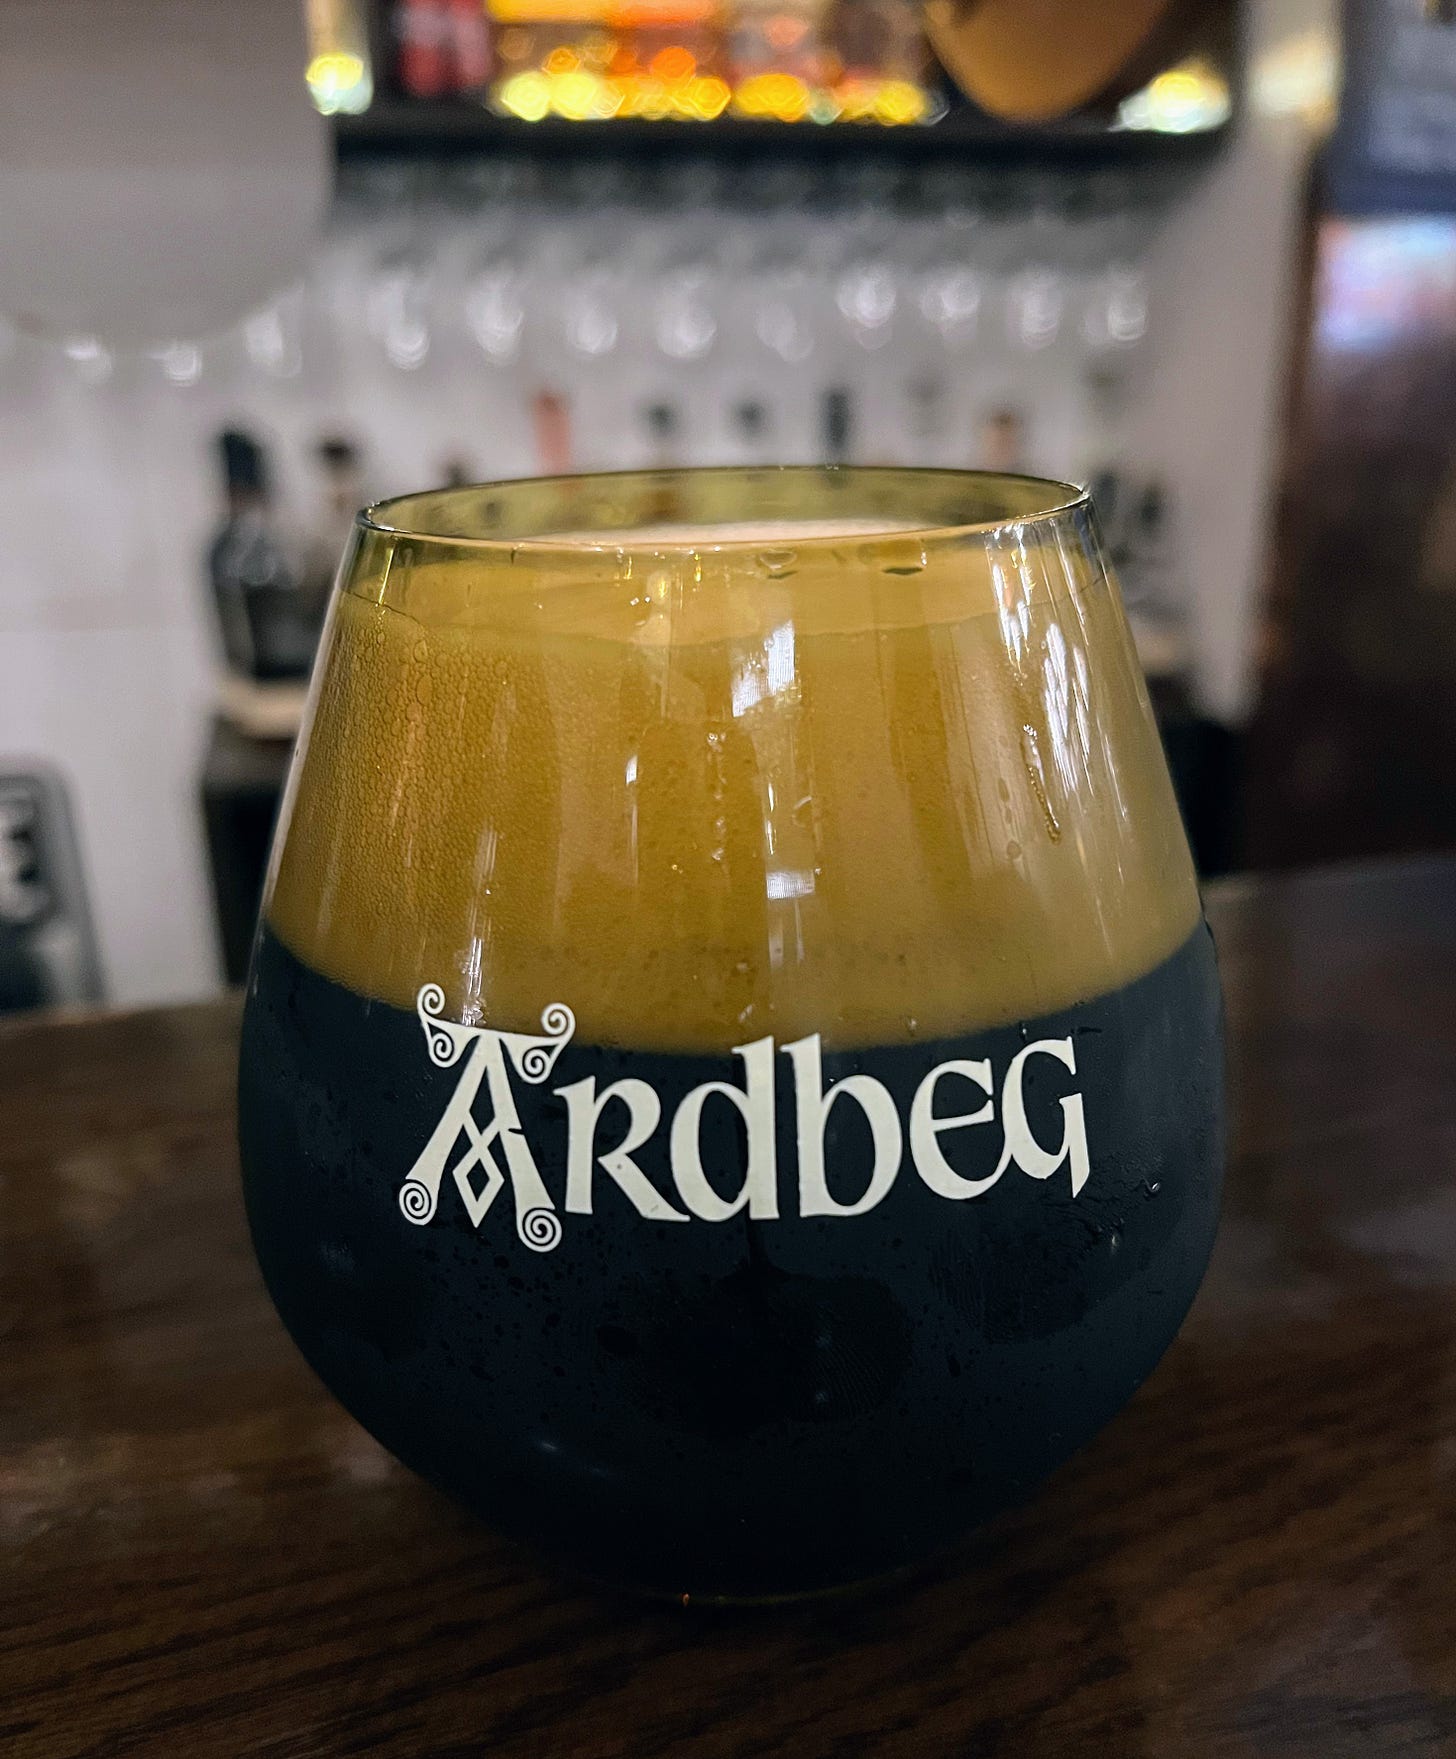 Glass of Ardbeg beer with a foamy head